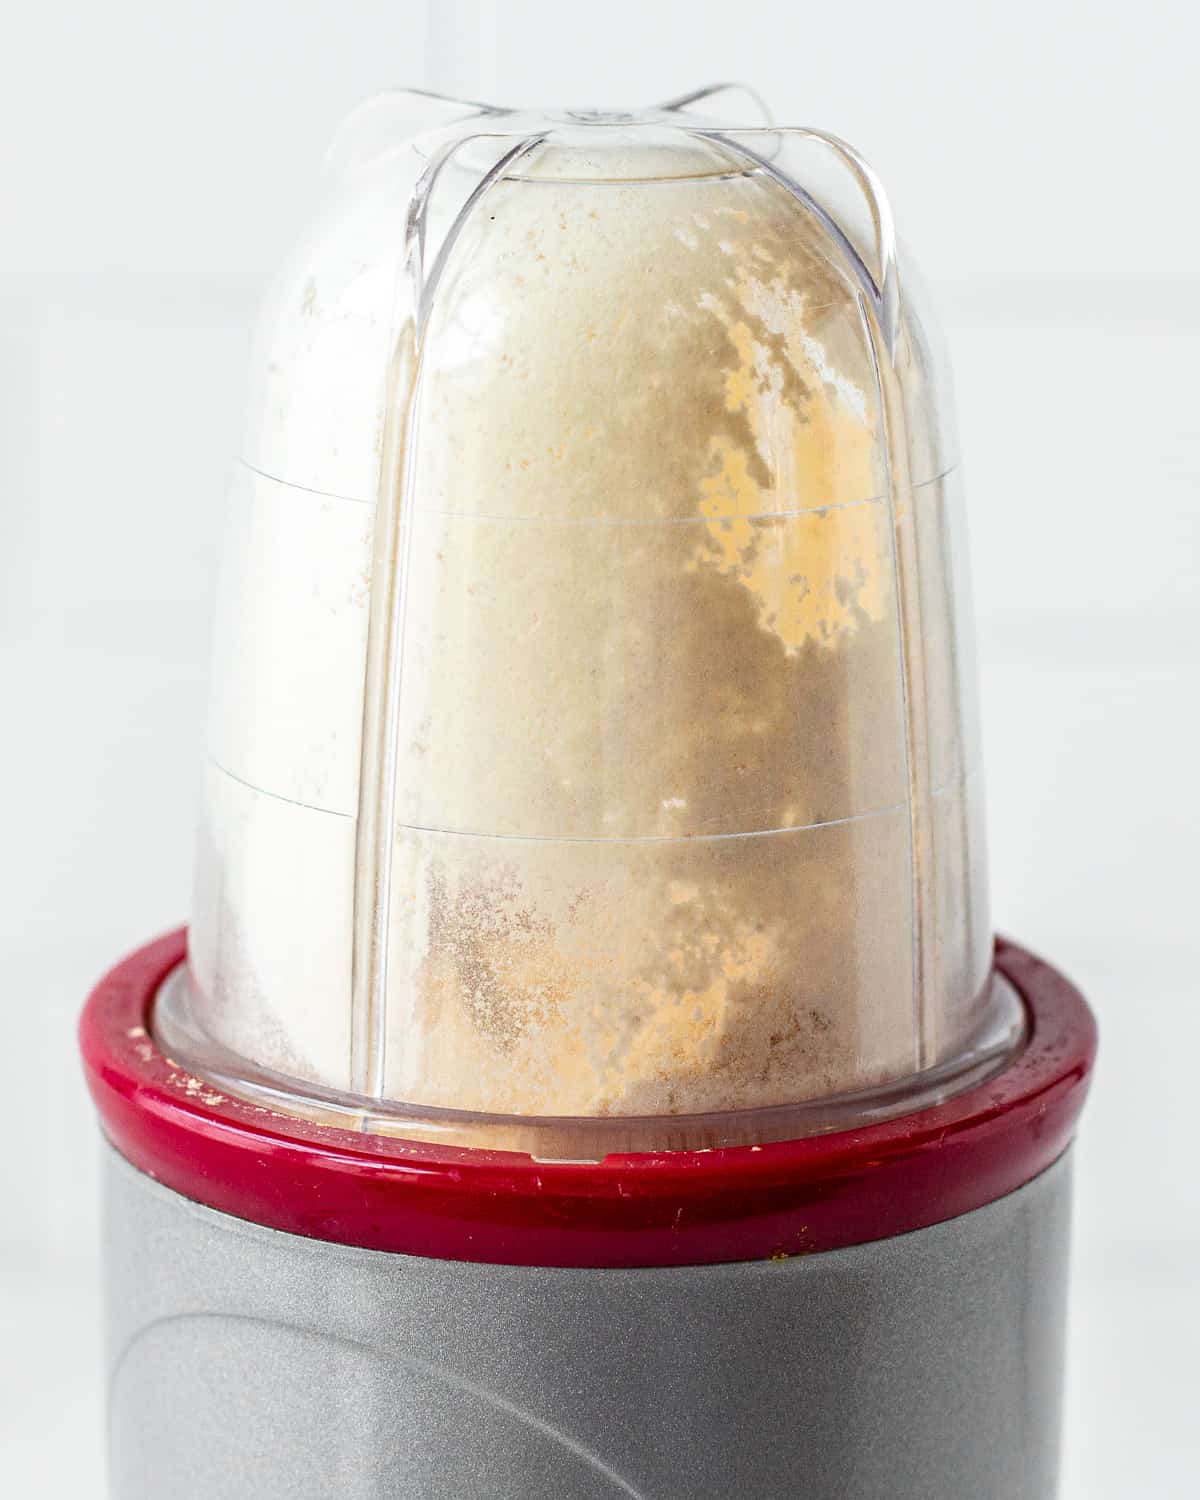 Chickpea flour in a small blender.